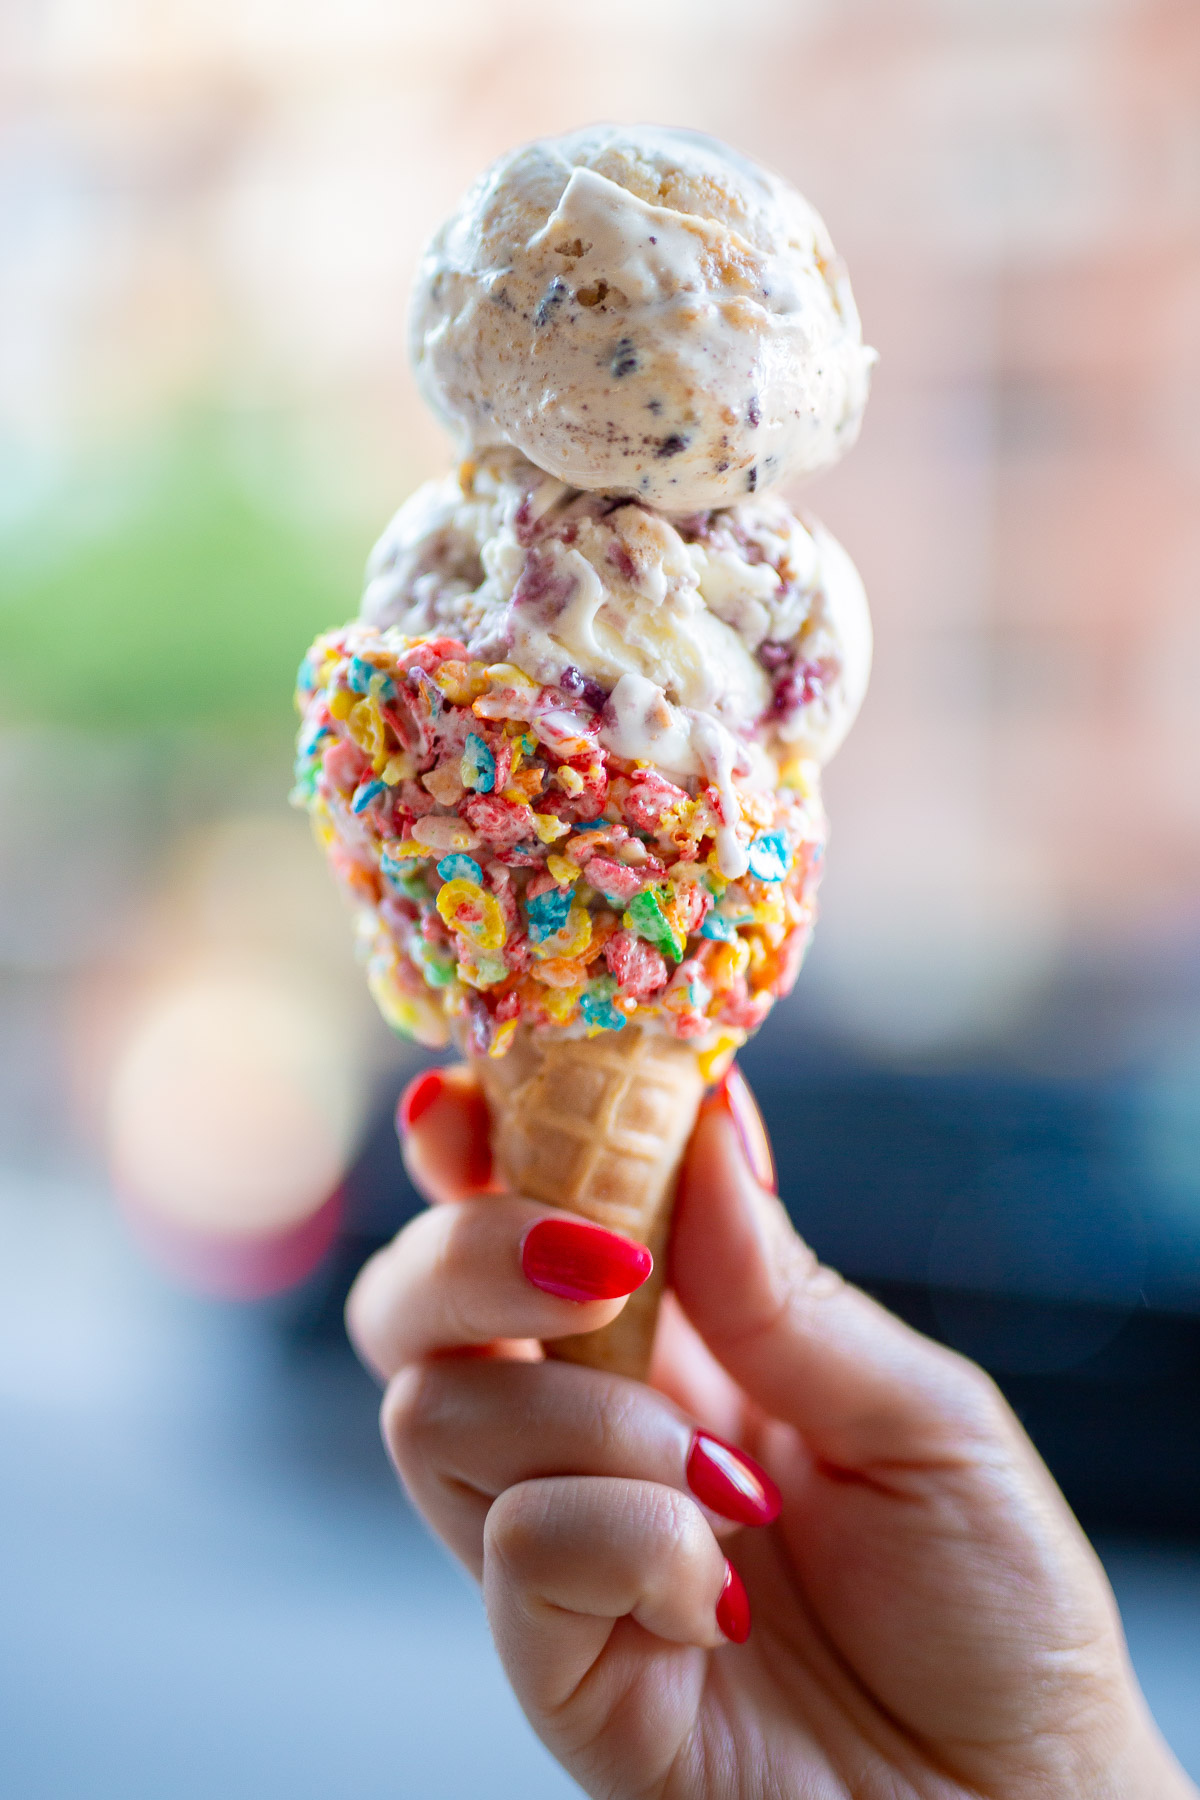 Fruity Pebbles Ice Cream Cone from Emack and Bolio, Best Ice Cream in NYC